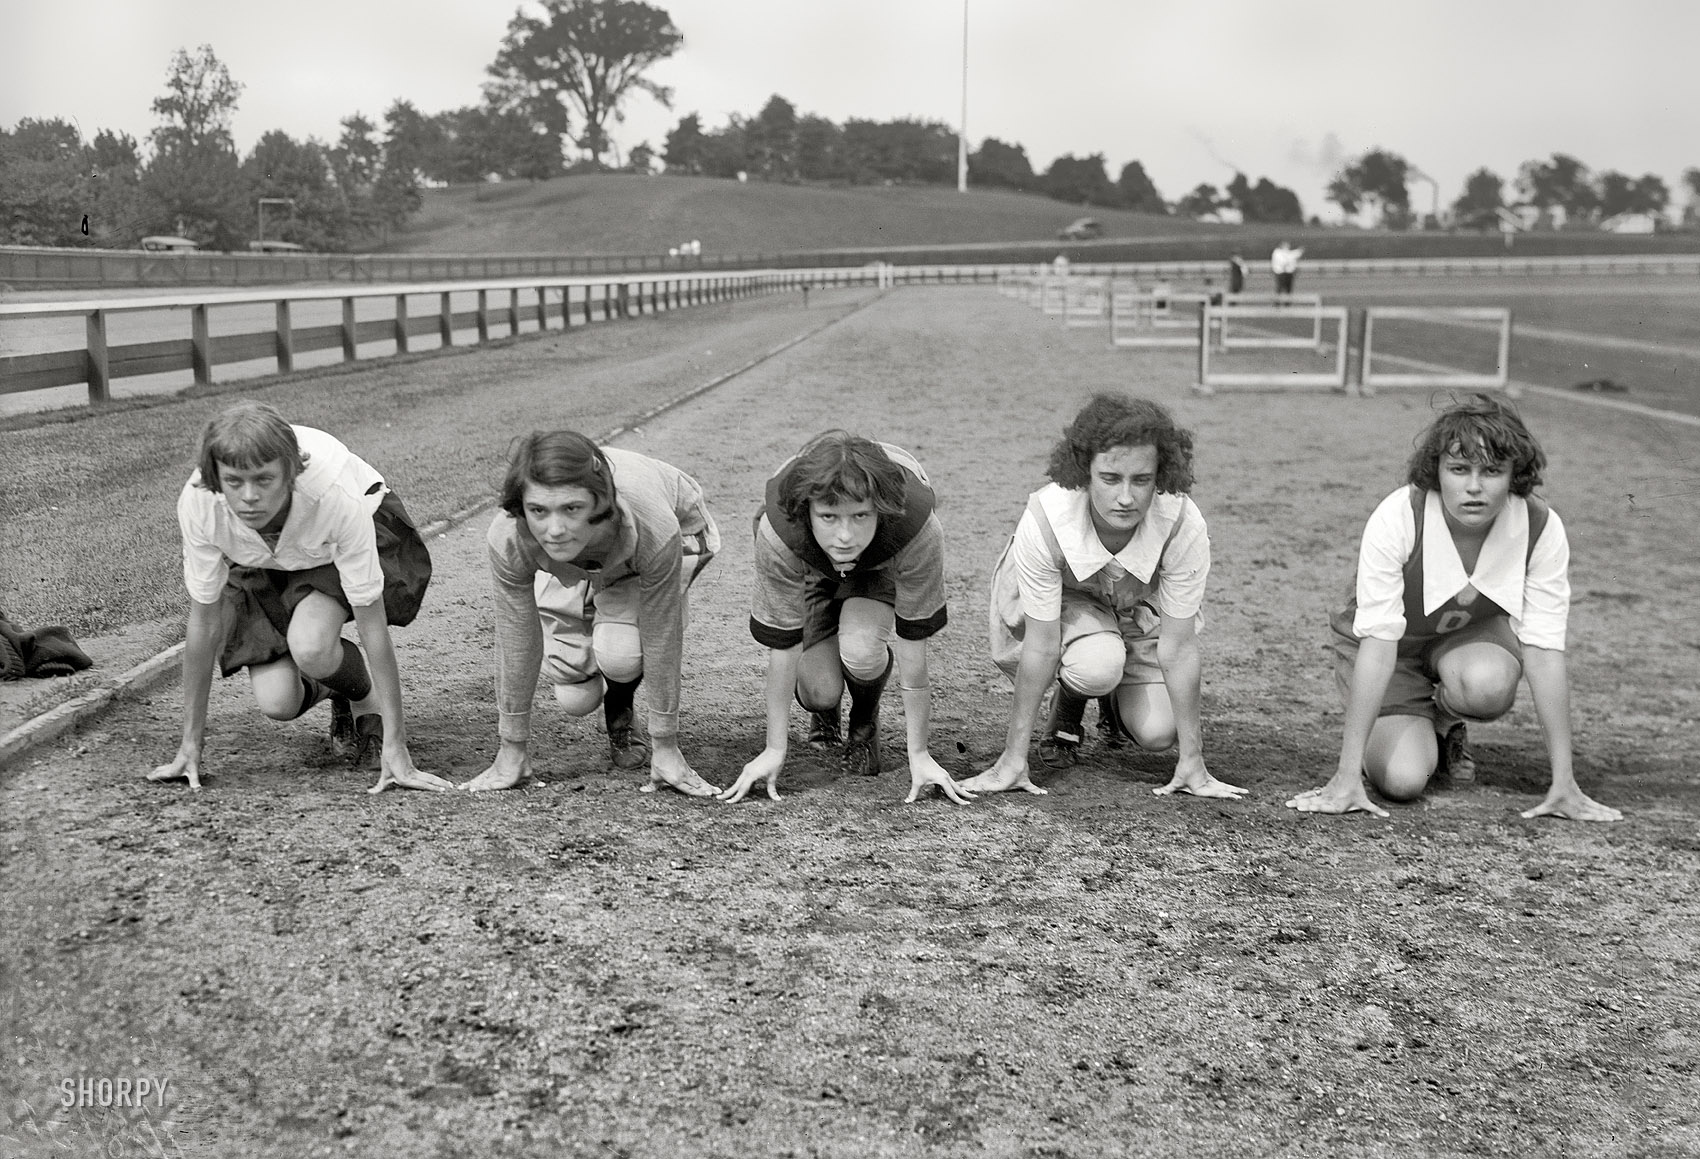 July 29, 1922. Newark, New Jersey. "Girl athletes to sail on Aquitania. Stine, Sabie, Gilliland, Batson, Snow." Contestants bound for Paris, France, and the first international track meet for women. Bain News Service. View full size.